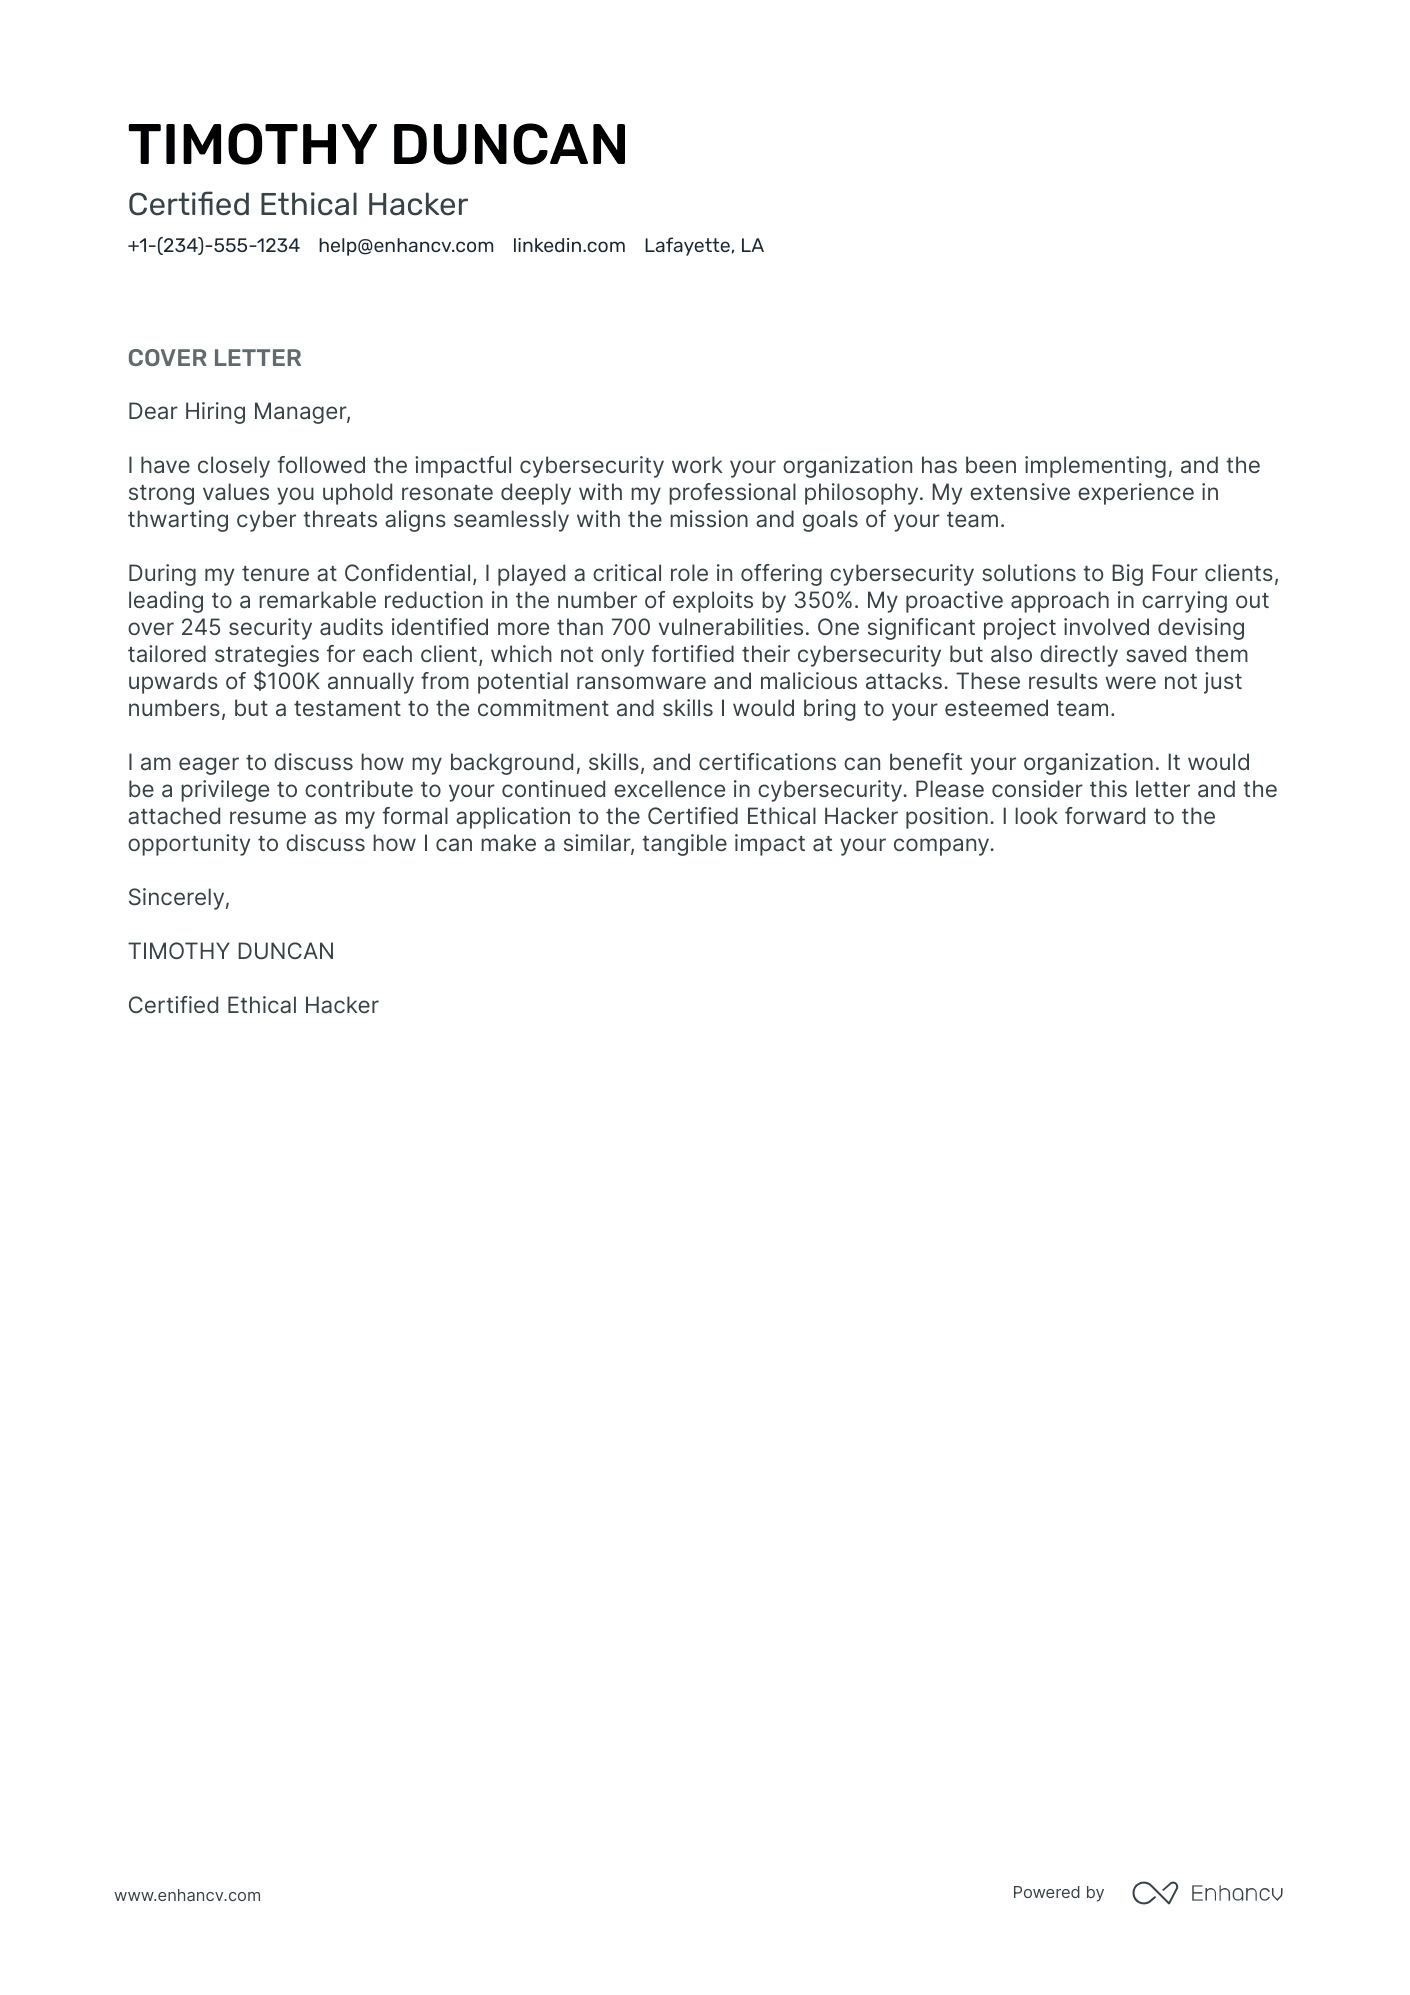 example cover letter for security analyst position